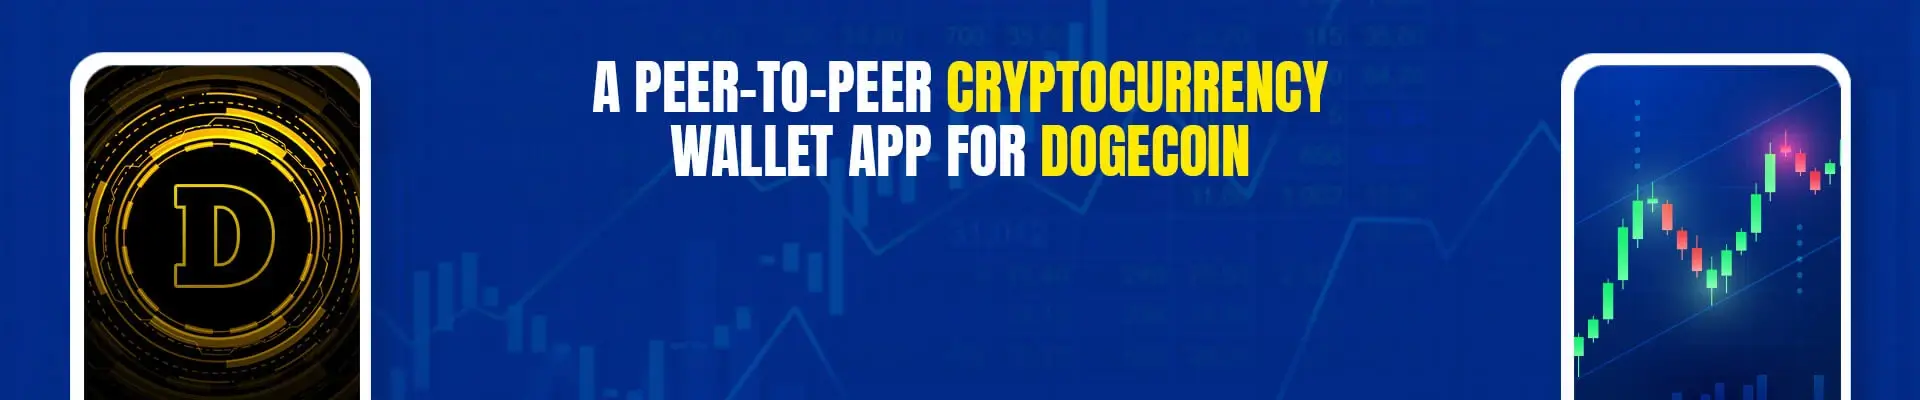 How To Develop A Peer-To-Peer Cryptocurrency Wallet App For Dogecoin